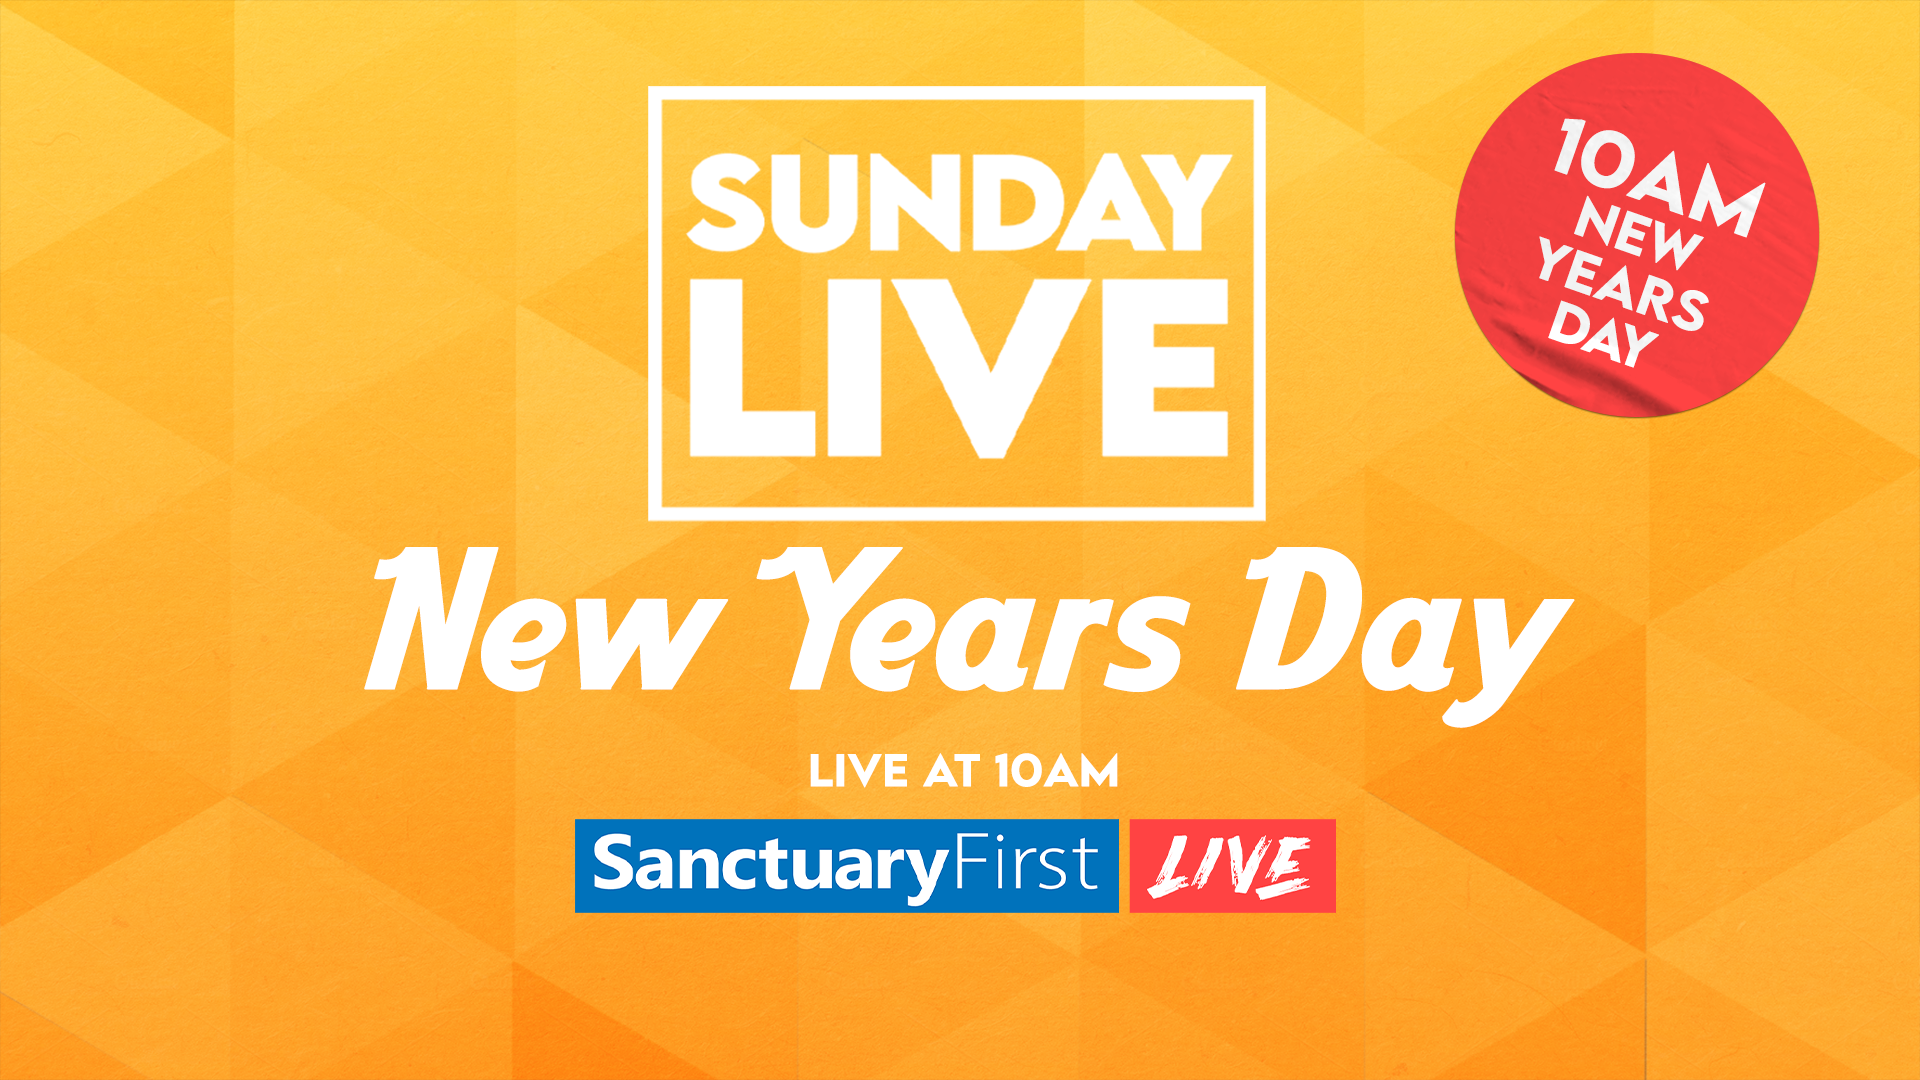 Sunday Live - New Years Day